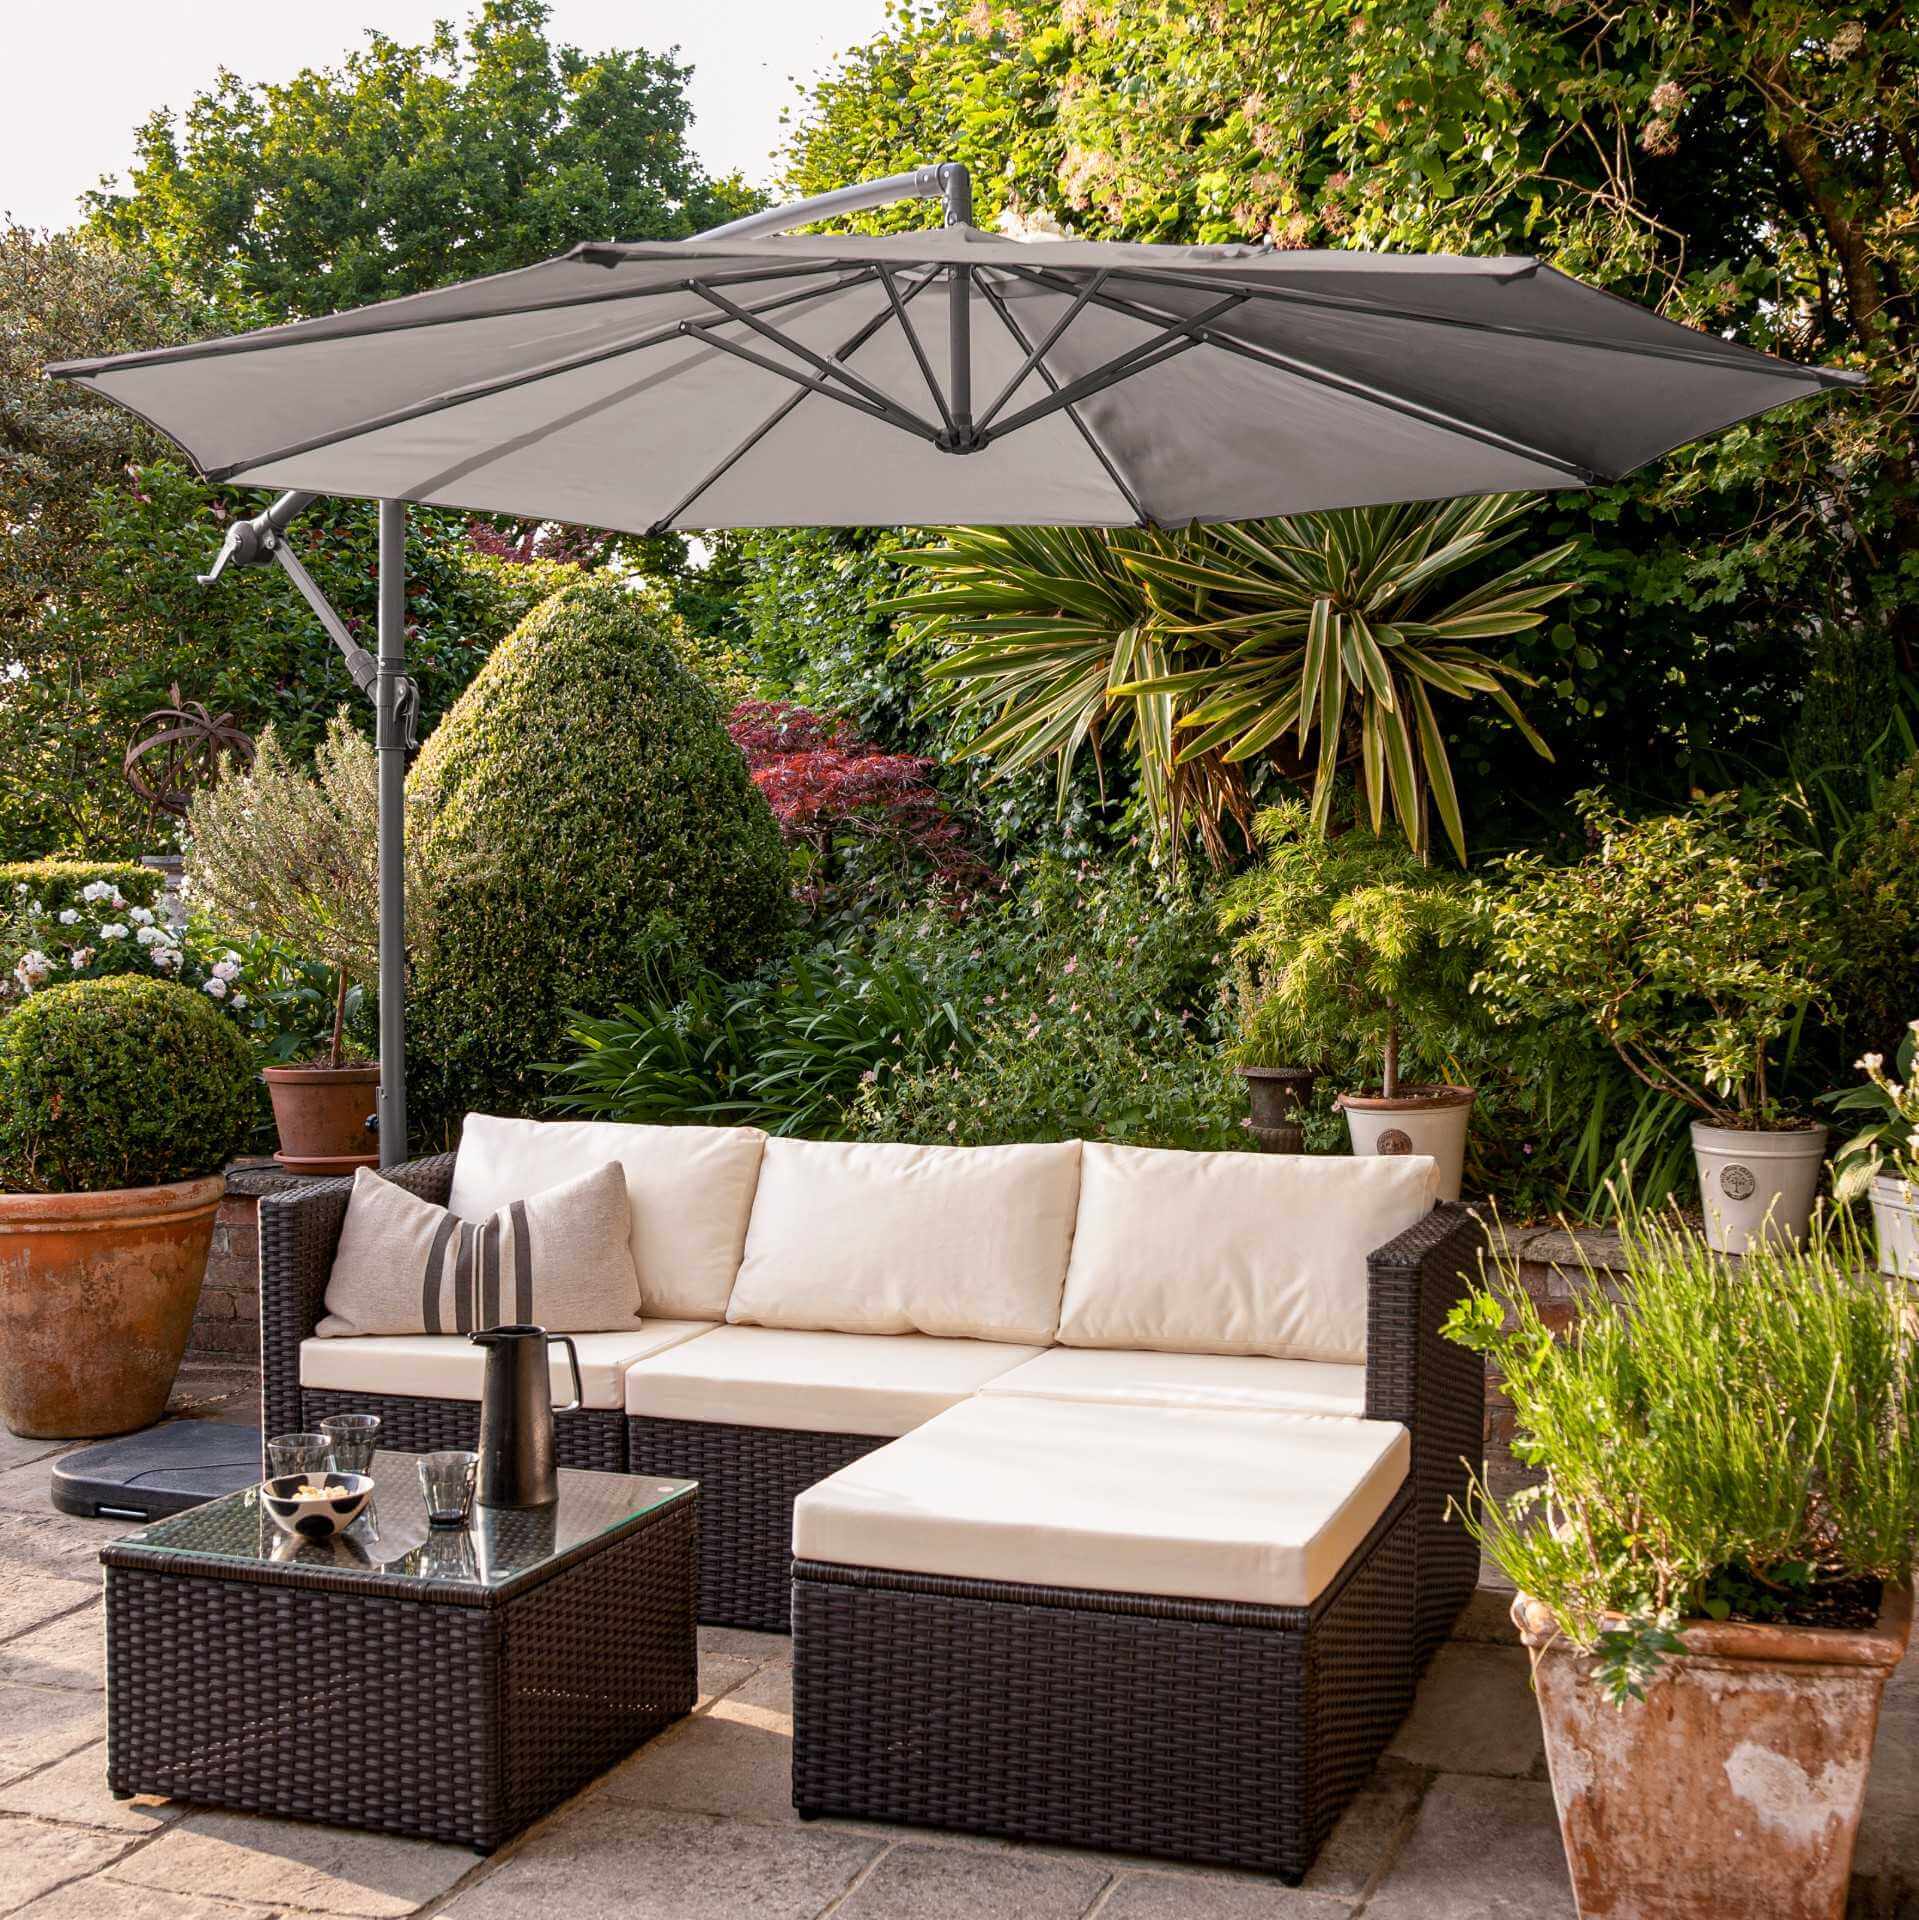 Weston 4 Seater Rattan Corner Sofa Set with Lean Over Parasol and Base - Brown Weave